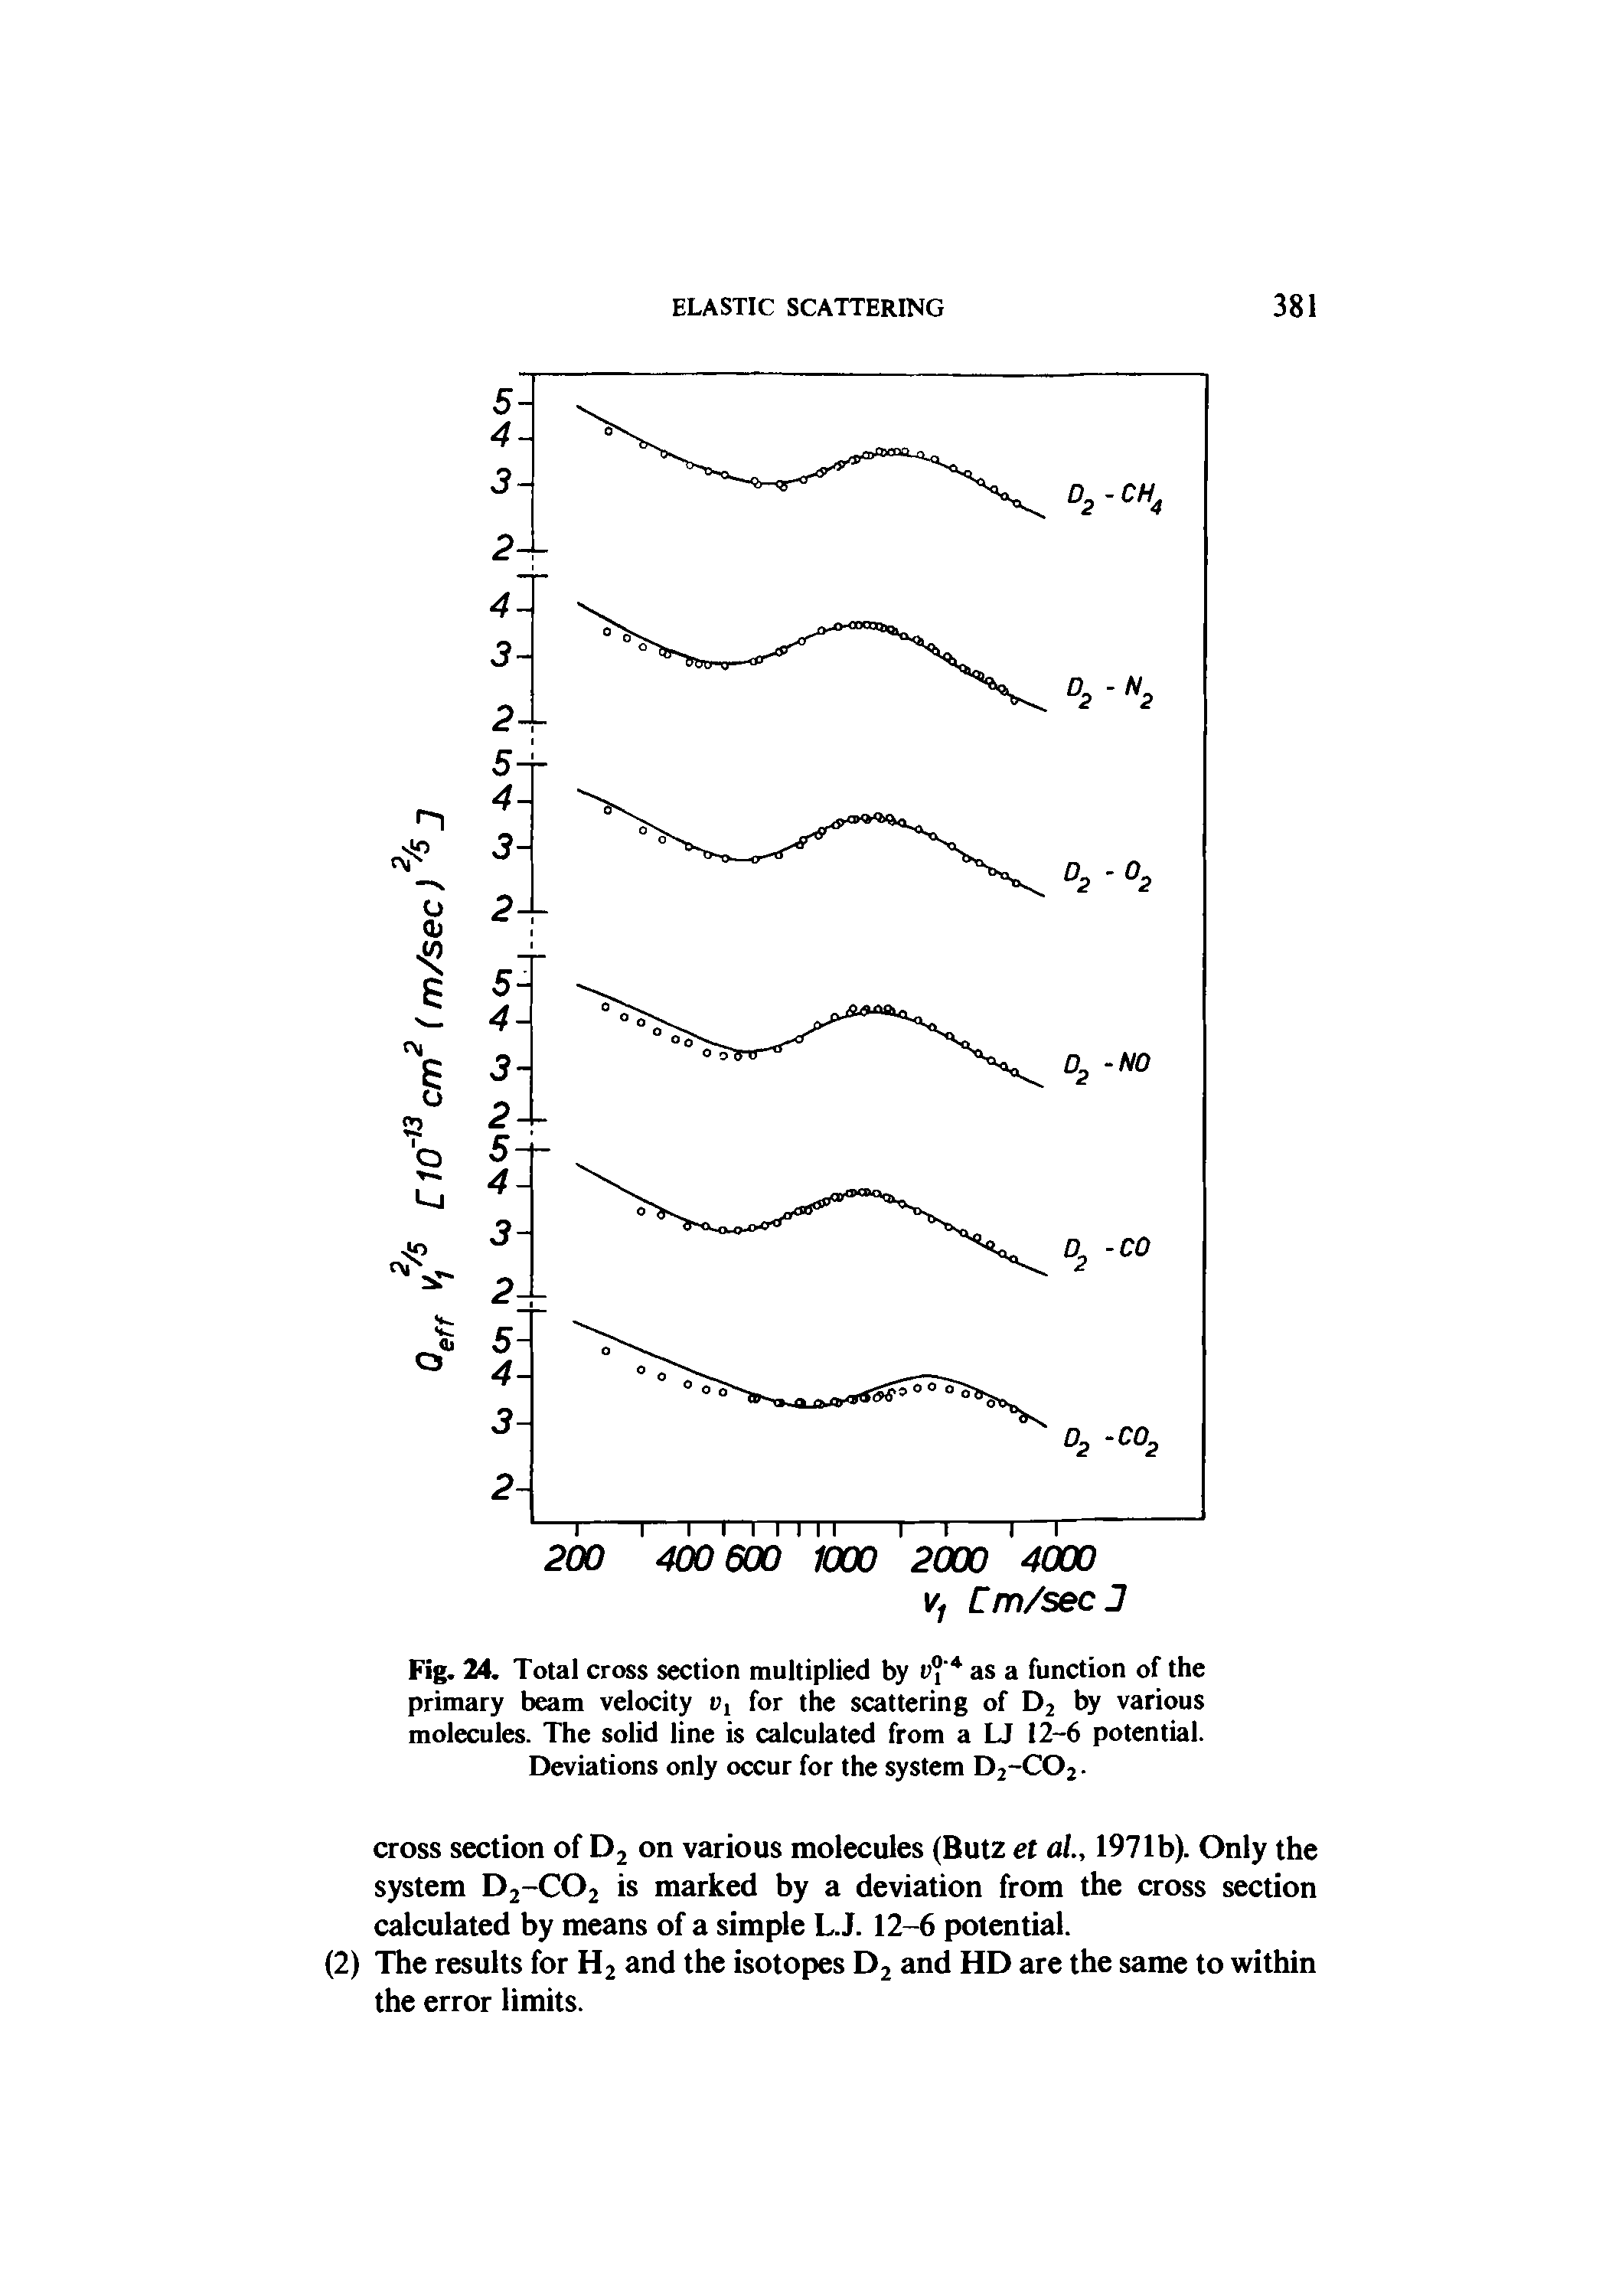 Fig. 24. Total cross section multiplied by v° as a function of the primary beam velocity for the scattering of D2 by various molecules. The solid line is calculated from a LJ 12-6 potential. Deviations only occur for the system D2-C02.